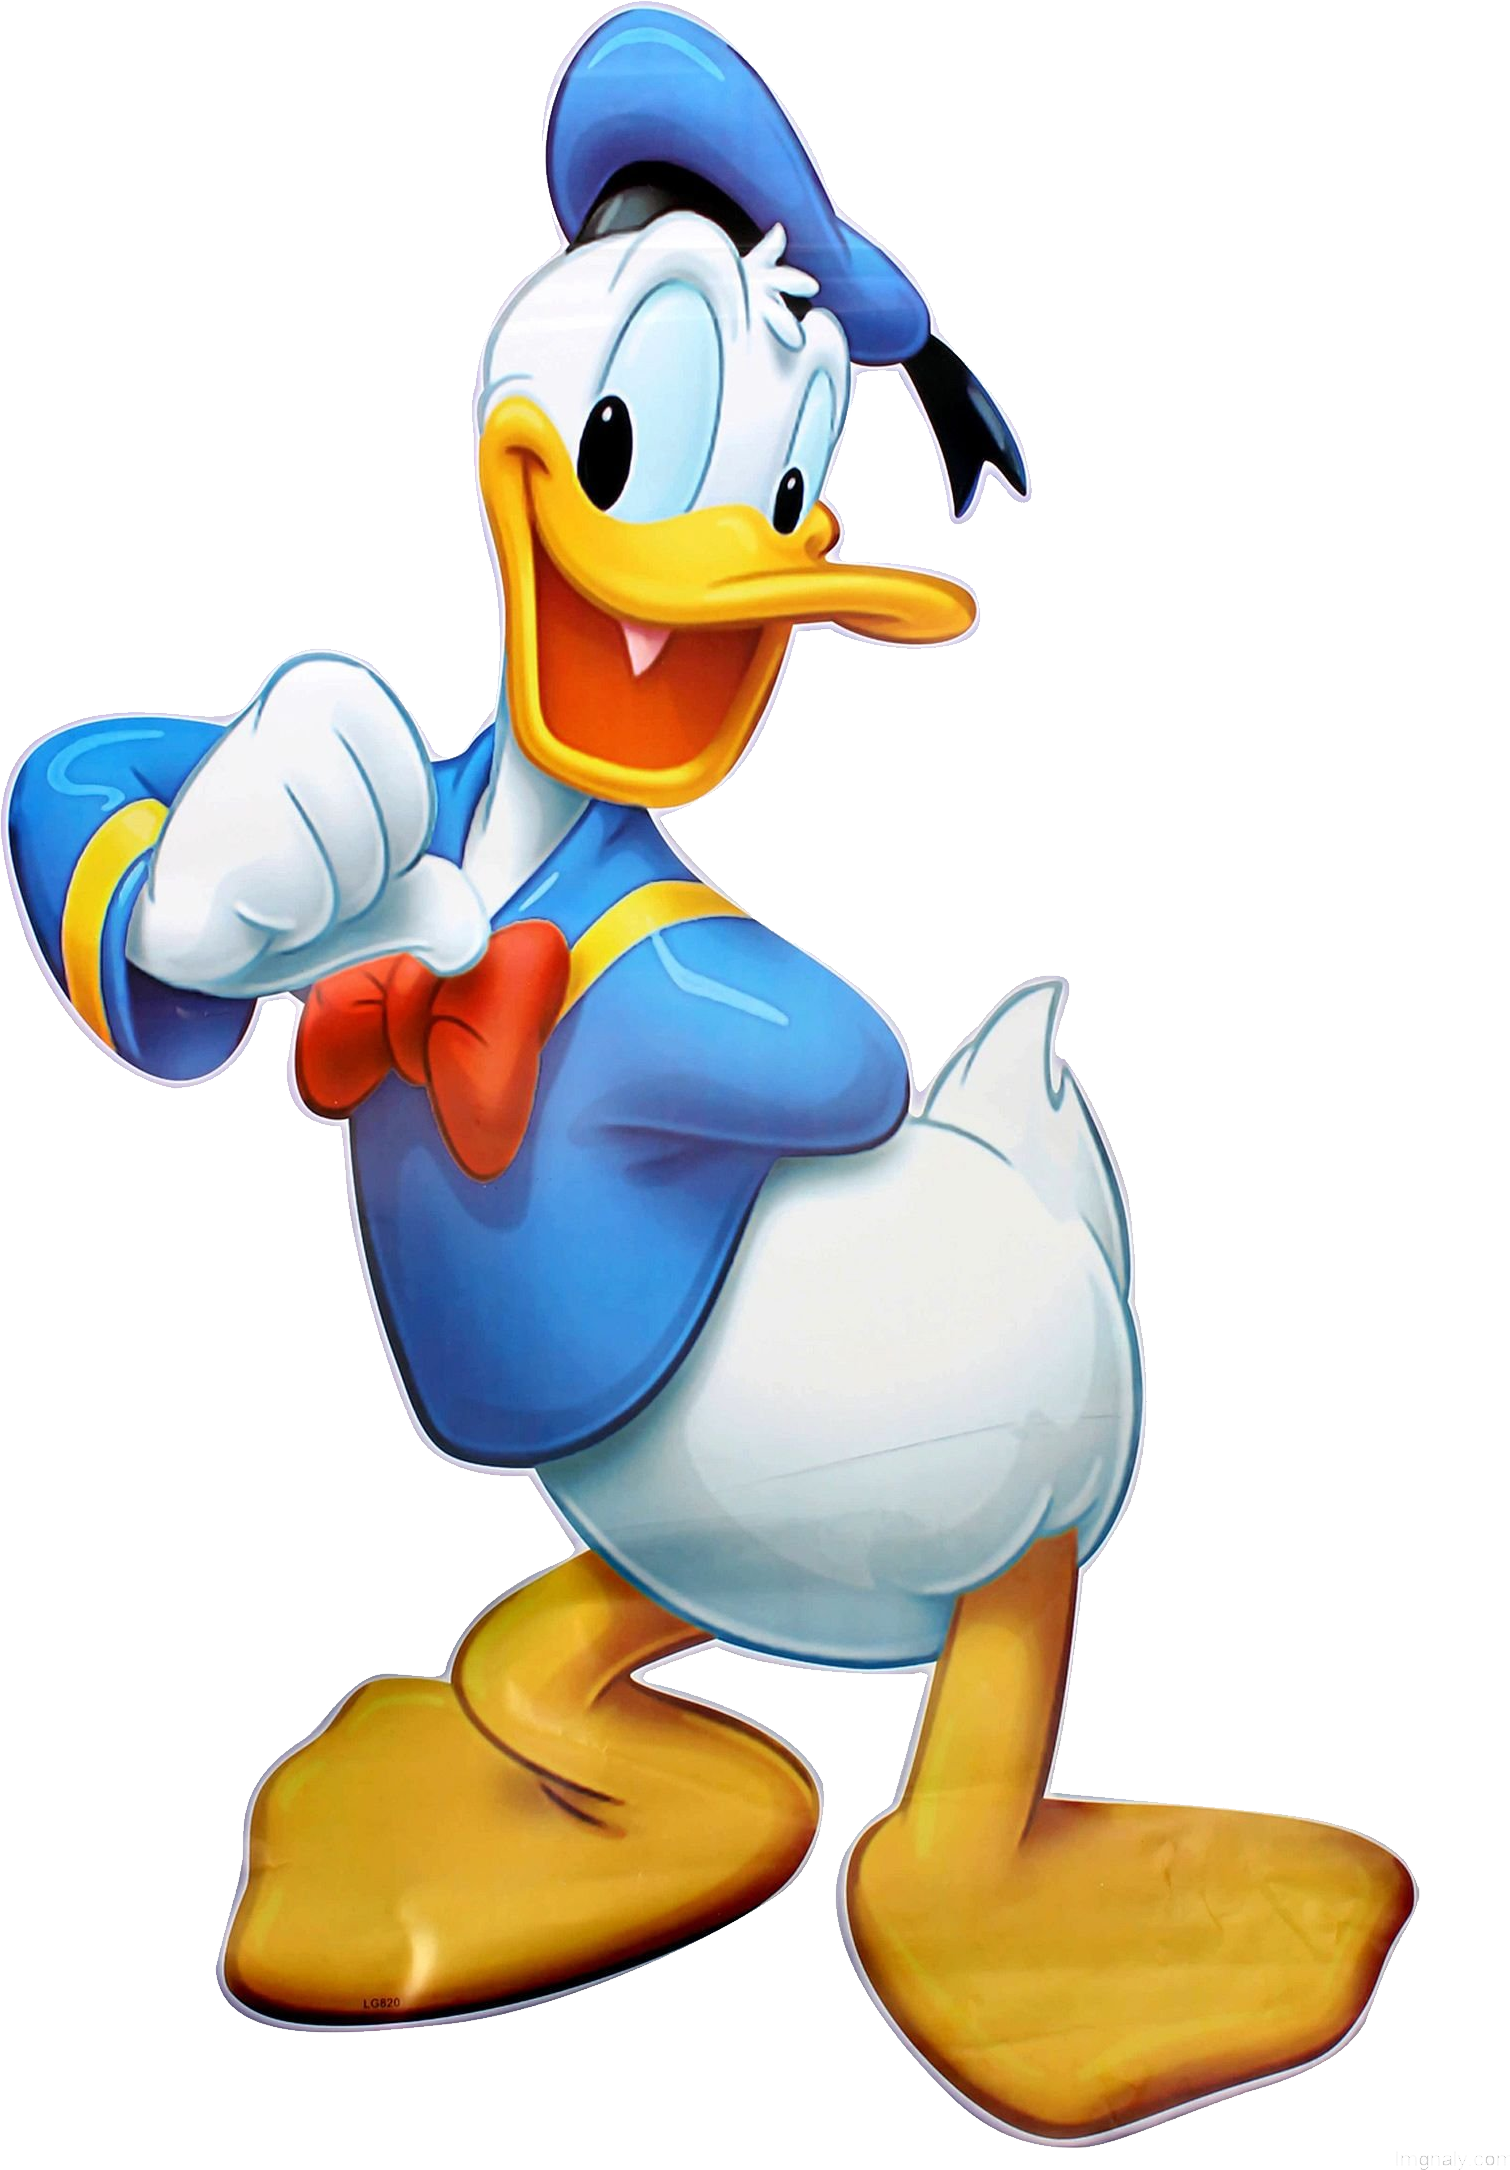 Donald Duck Cartoon Background PNG Image